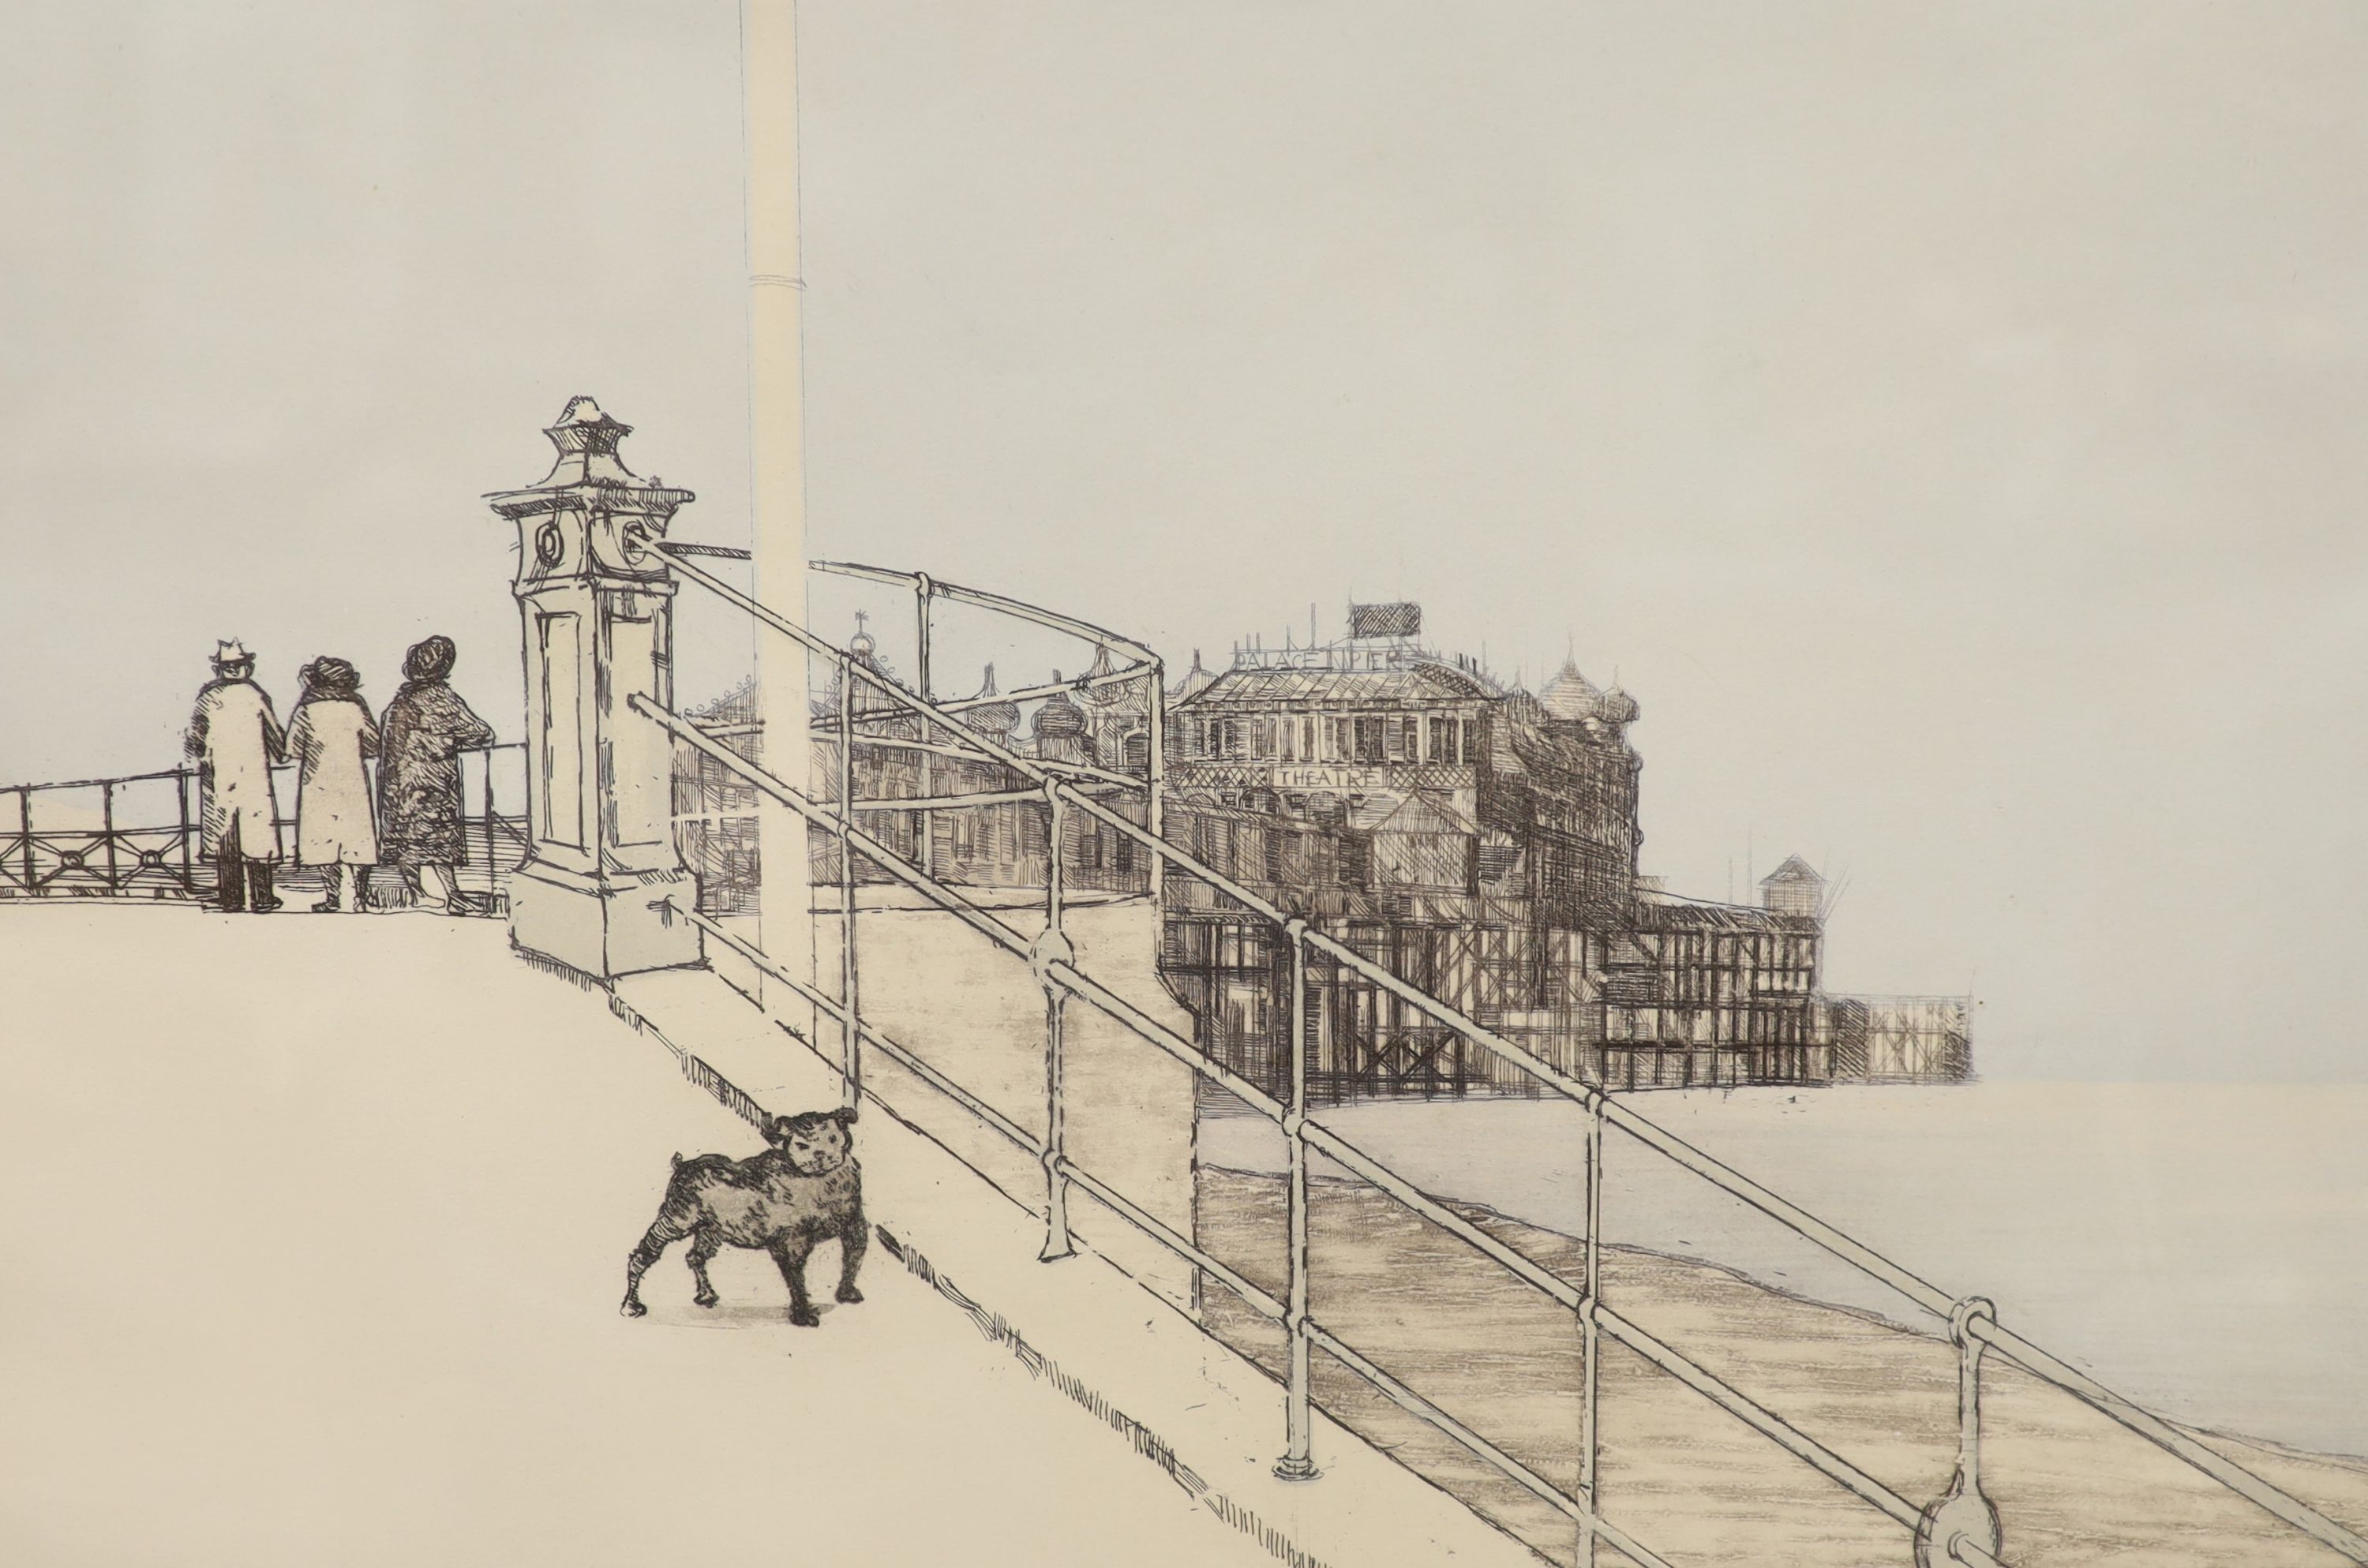 Richard Beer, limited edition print, Palace Pier, Brighton, signed, 22/70, 40 x 56cm